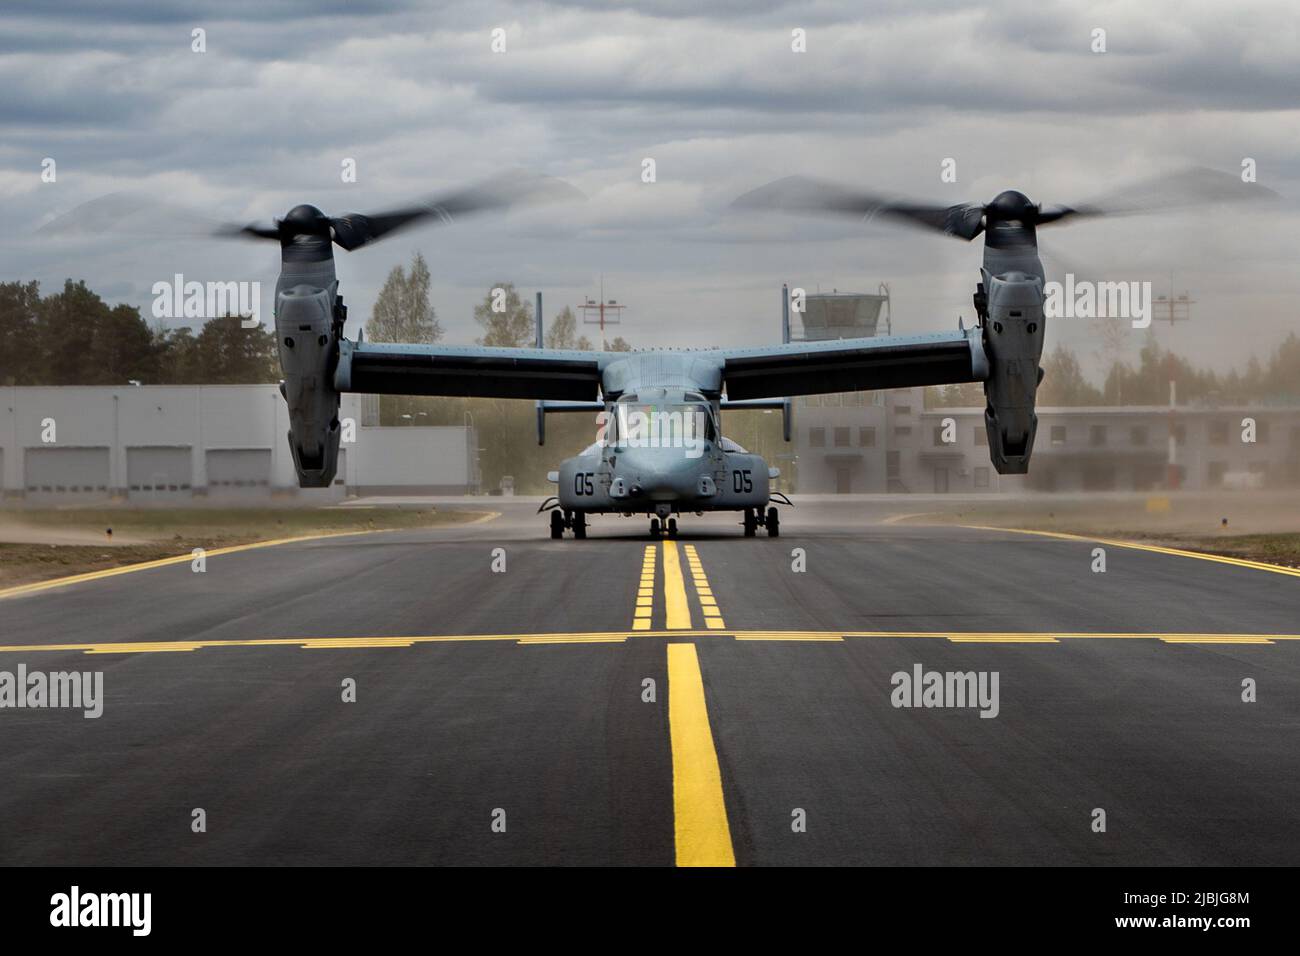 A U.S. Marine Corps MV-22 Osprey, assigned to the Aviation Combat Element, 22nd Marine Expeditionary Unit, takes off from Parnu Airfield, Parnu, Estonia, to return to Wasp-class amphibious assault ship USS Kearsarge (LHD 3), during ship-to-shore movements May 21, 2022. The 22nd MEU is participating in the Estonian-led exercise Siil 22 (Hedgehog 22 in English). Hedgehog 22 brings together members of the Estonian Defense Force and Sailors and Marines under Commander Task Force 61/2 to enhance allied interoperability and preserve security and stability in the Baltic region. (U.S. Marine Corps pho Stock Photo